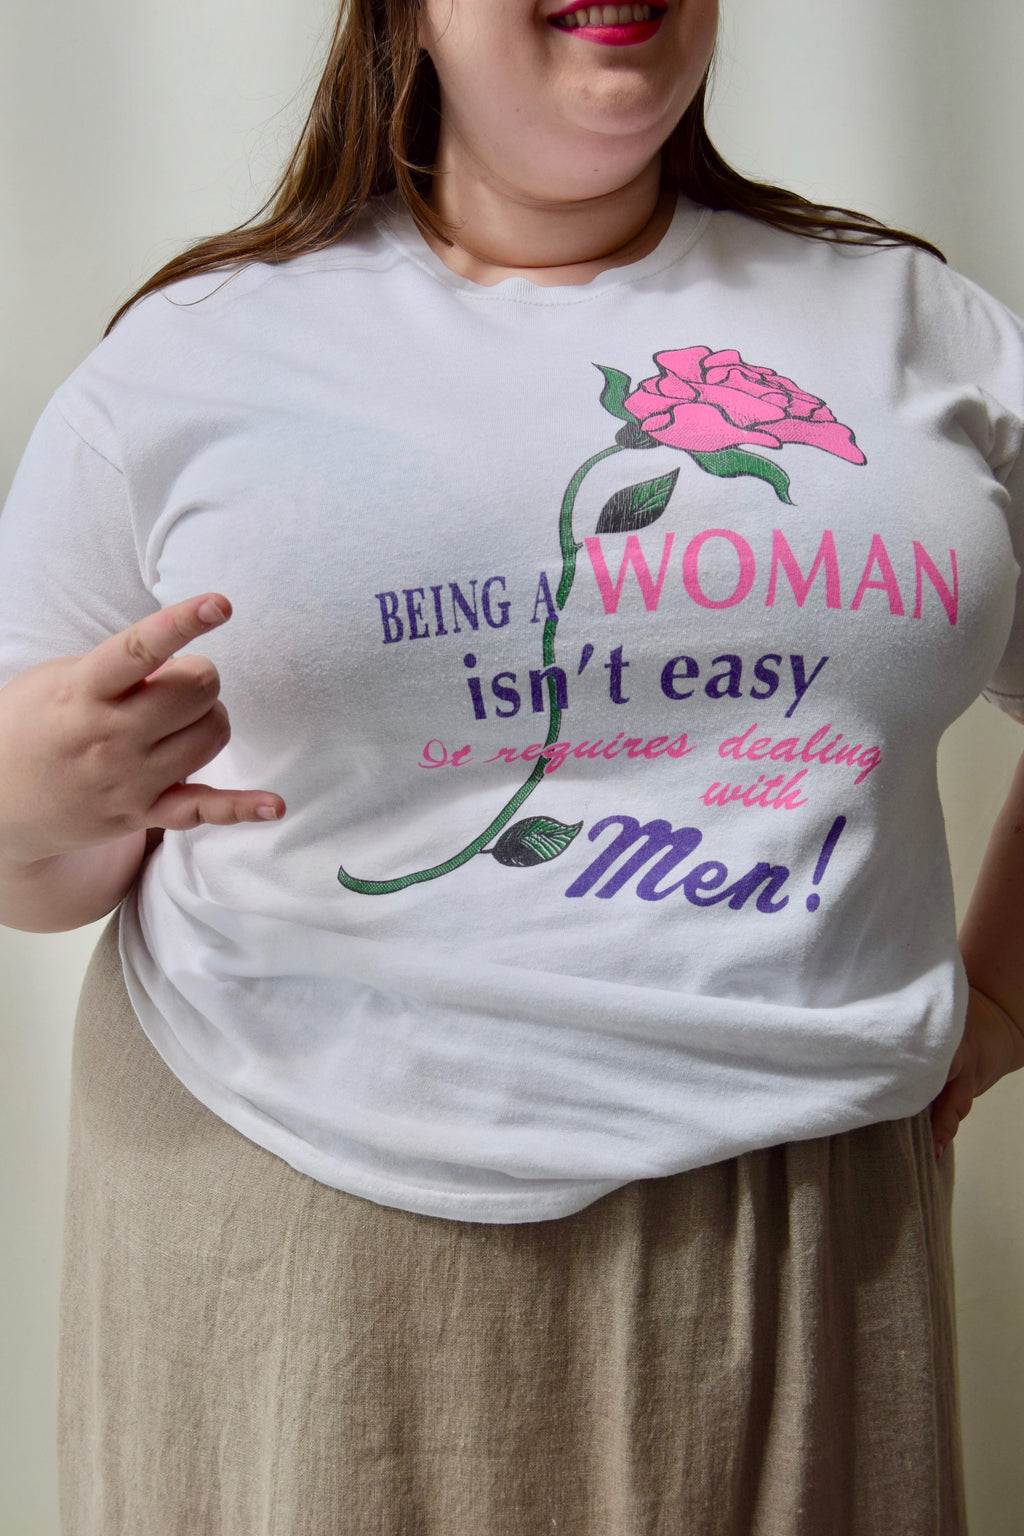 "Being A Woman Isn't Easy" Tee